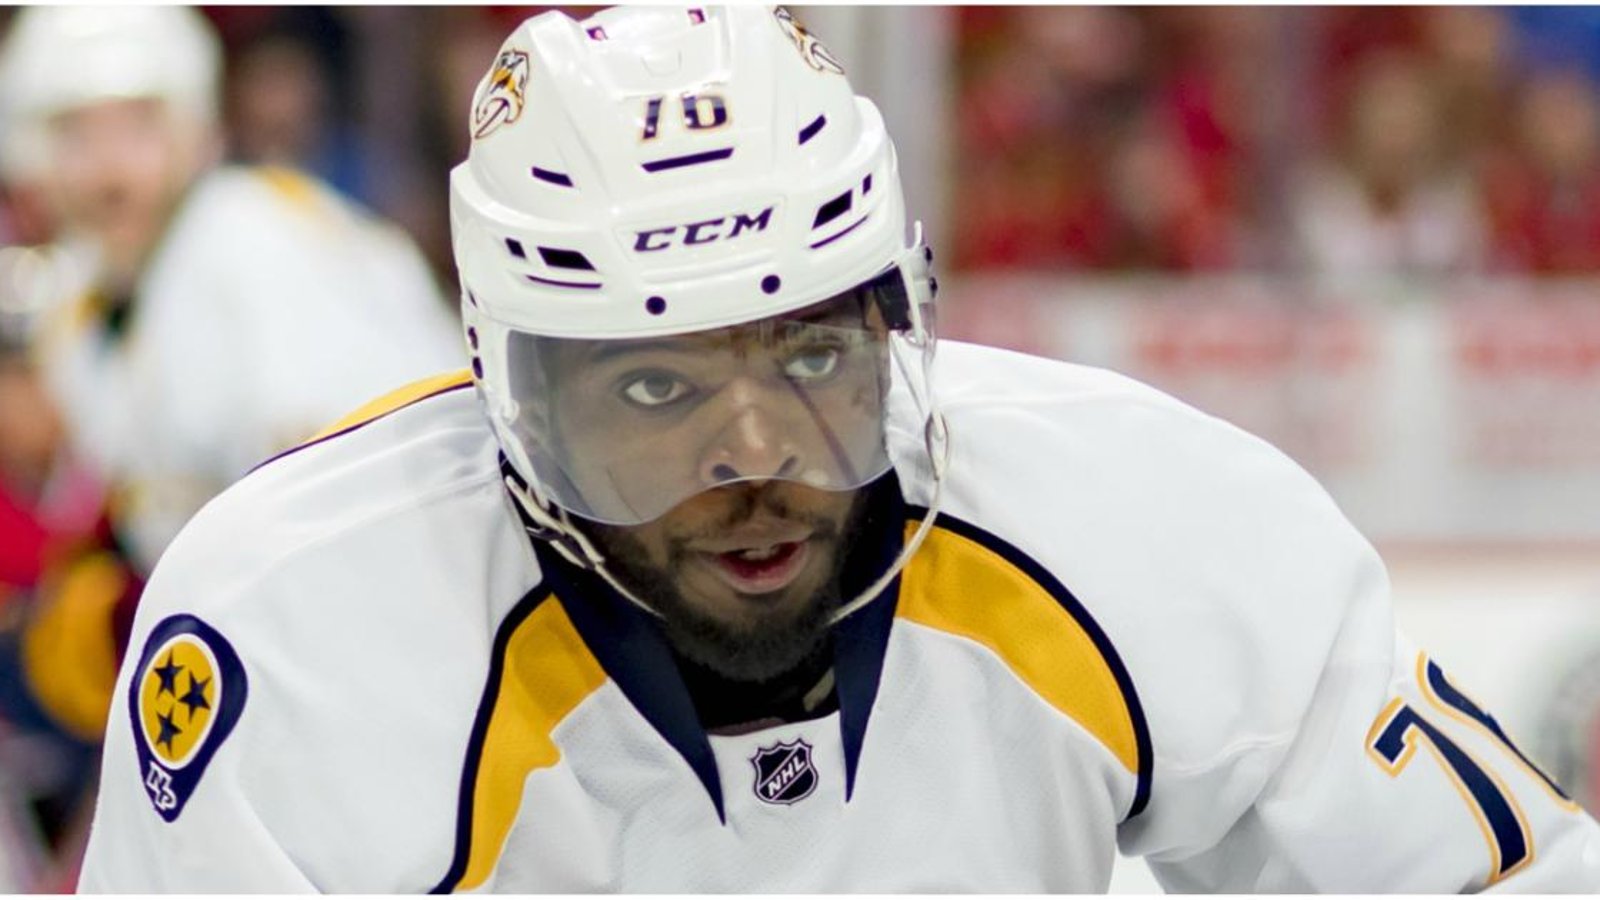 P.K. Subban makes another incredible gesture to create peace amidst racial controversies